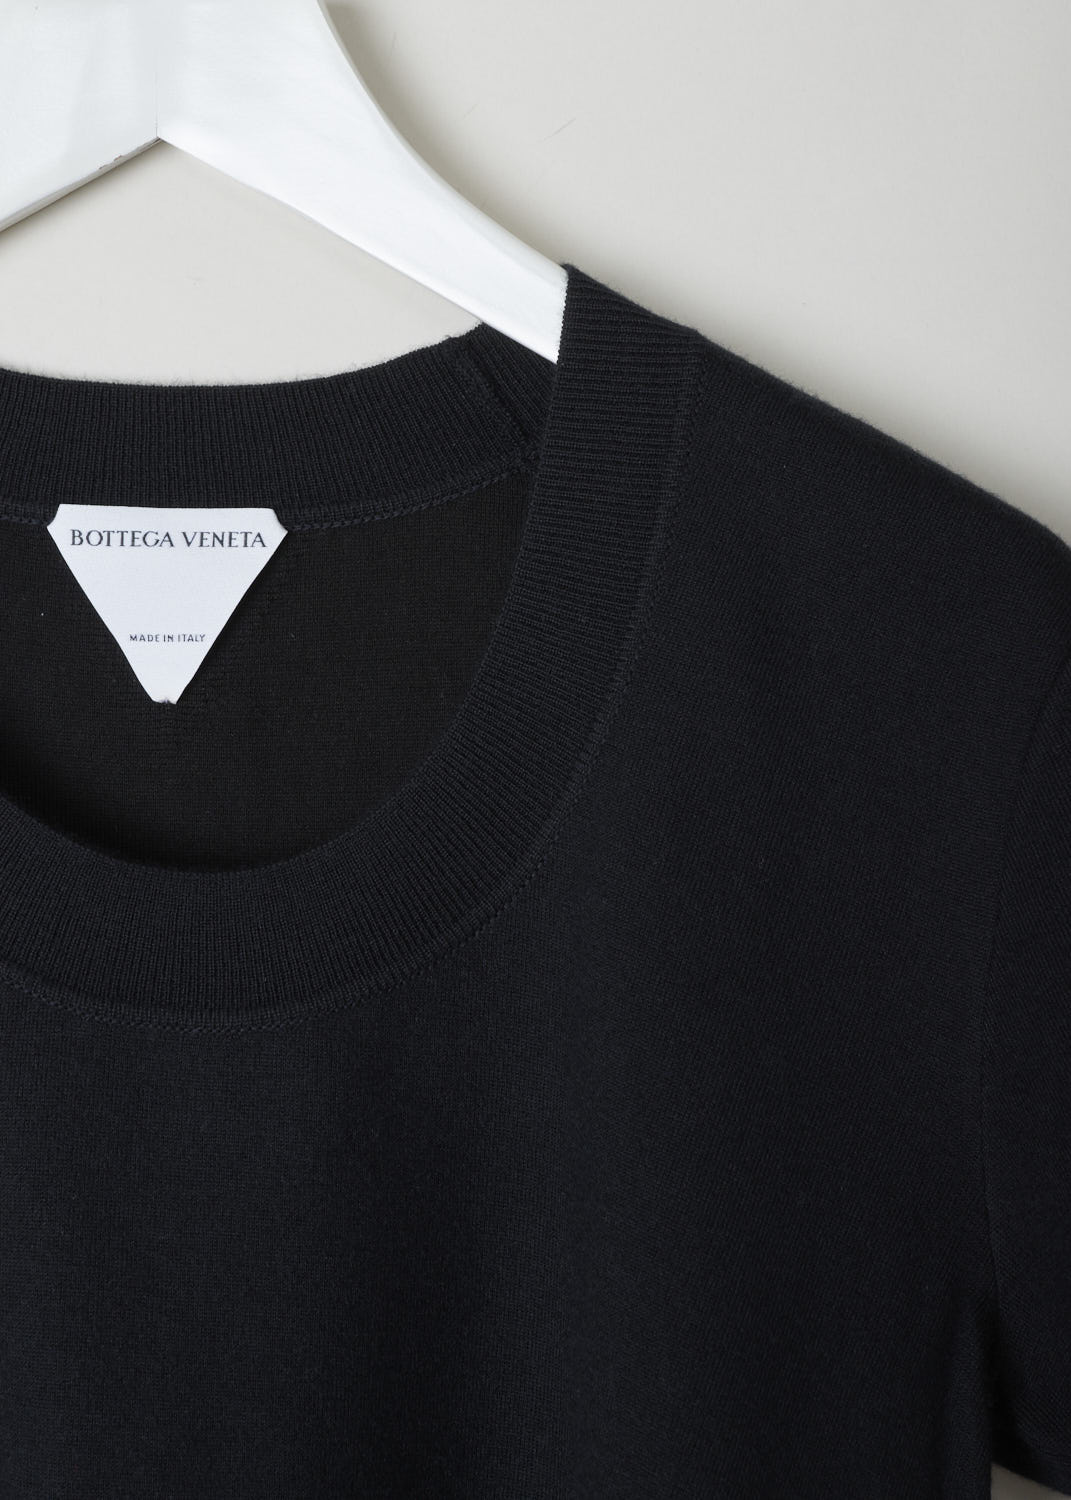 BOTTEGA VENETA, BLACK CASHMERE TOP, 647549_V0A50_1000, Black, Detail, Black, short sleeved top. This cashmere top has a rounded collar with a ribbed finish. That same finish can be found along the cuffs and the hem. In the back of the neck, the signature Bottega Veneta triangle can be found. 
